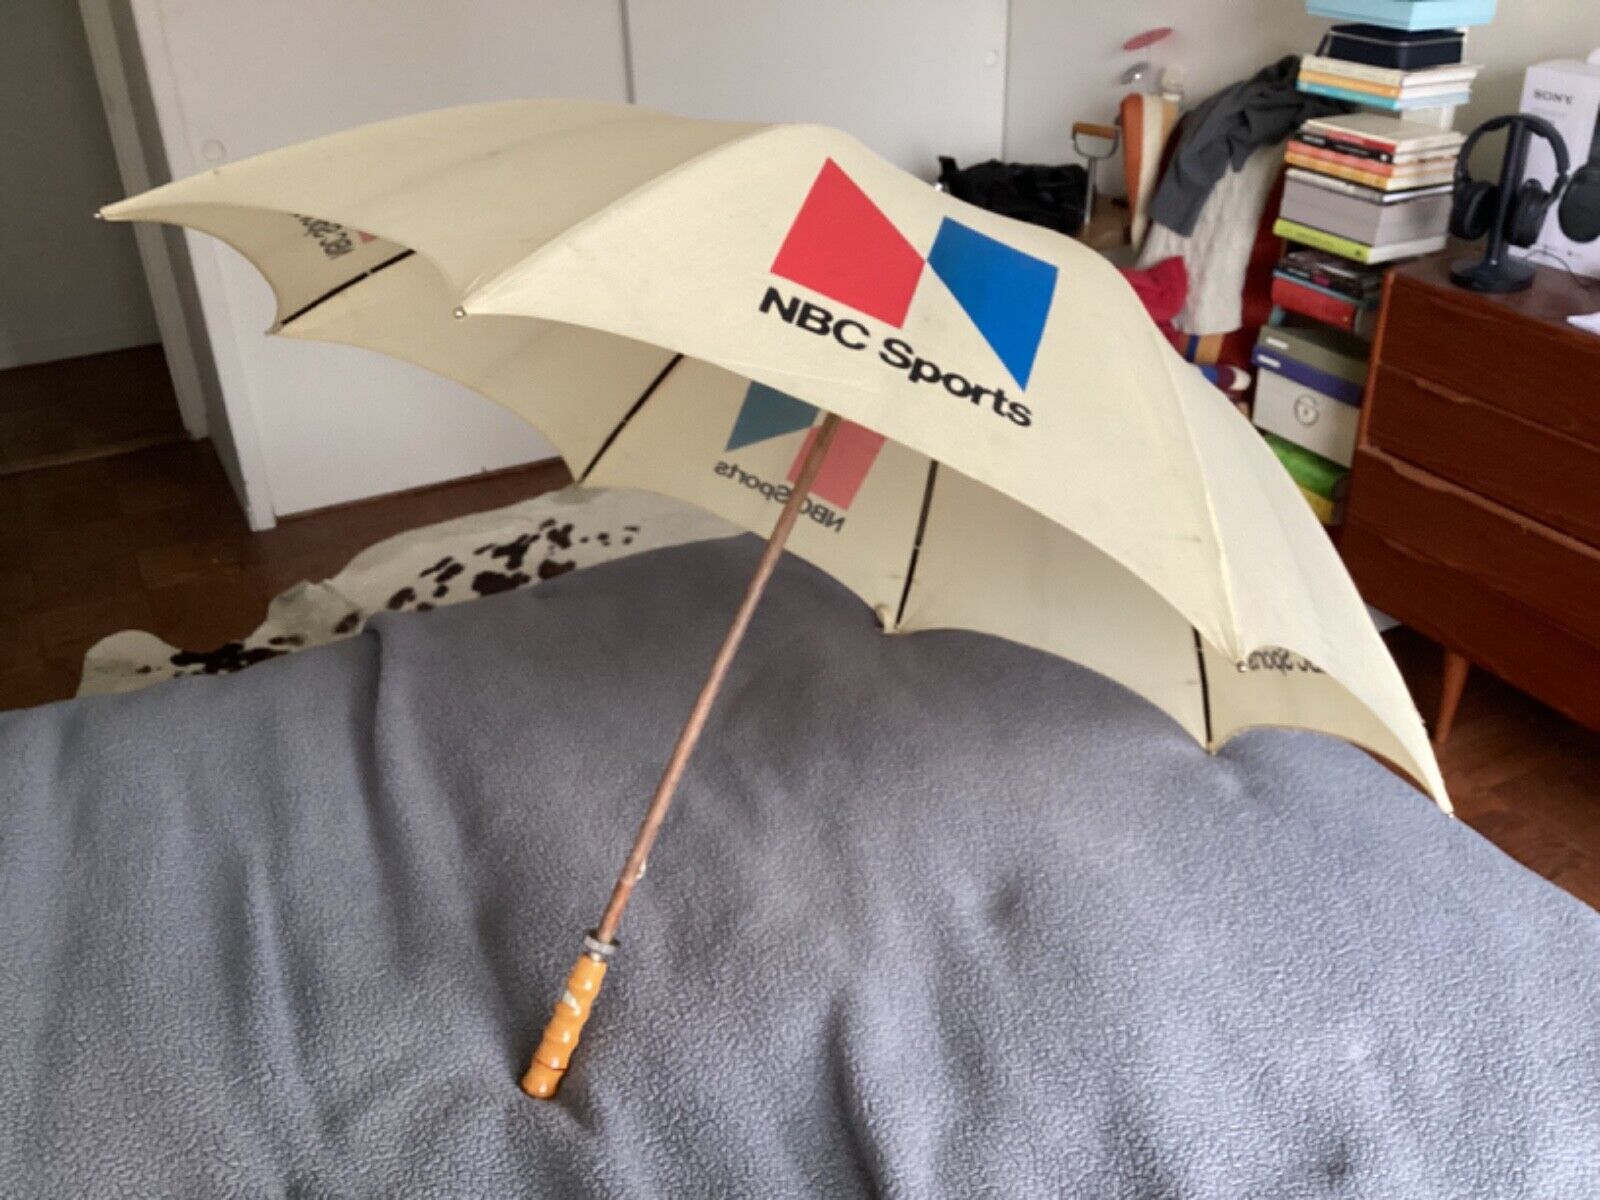 NBC Sports Official Umbrella 1972 for On-Air Reporting